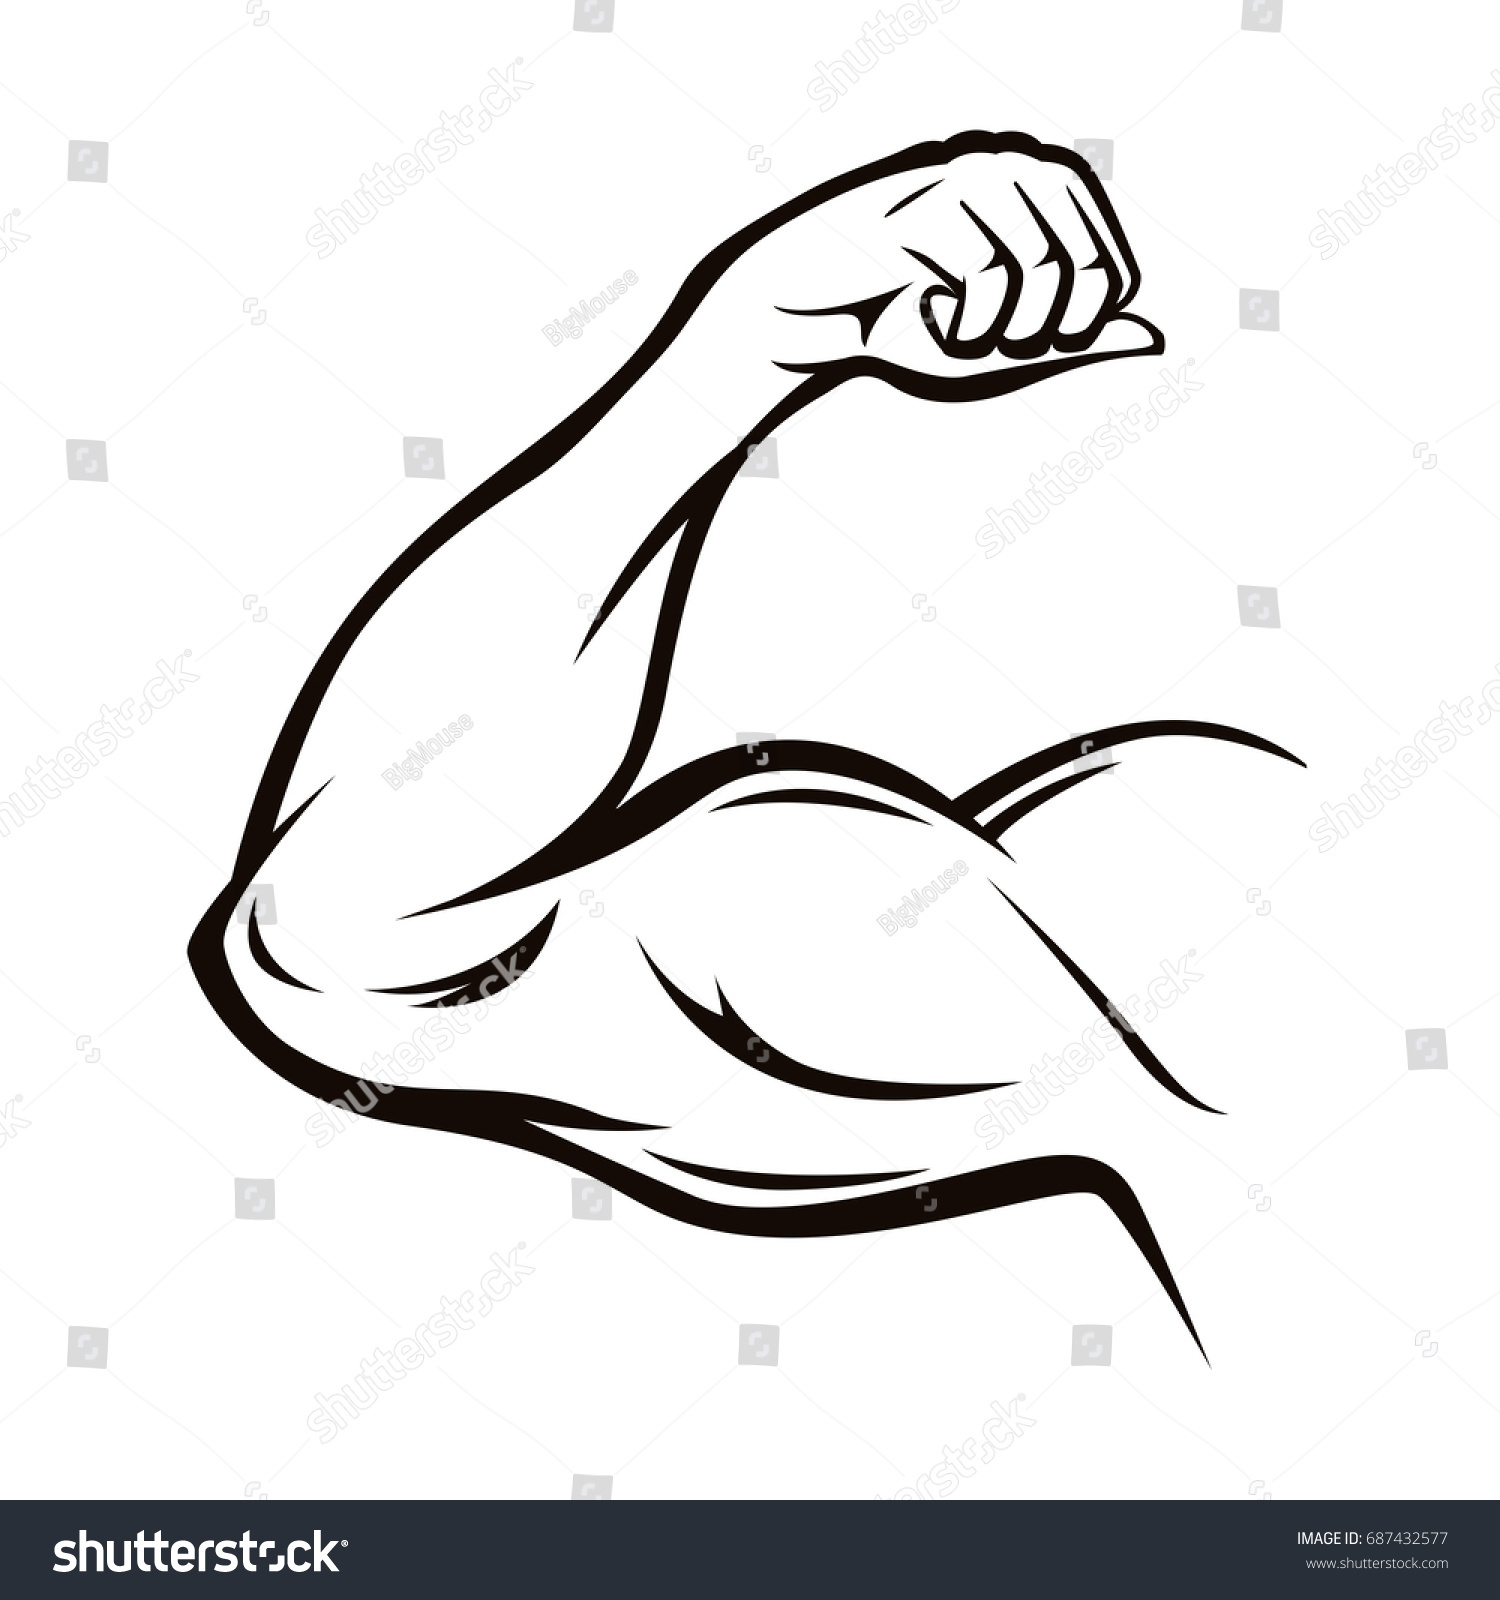 Black Thin Line Strong Male Arm Stock Vector 687432577 ...